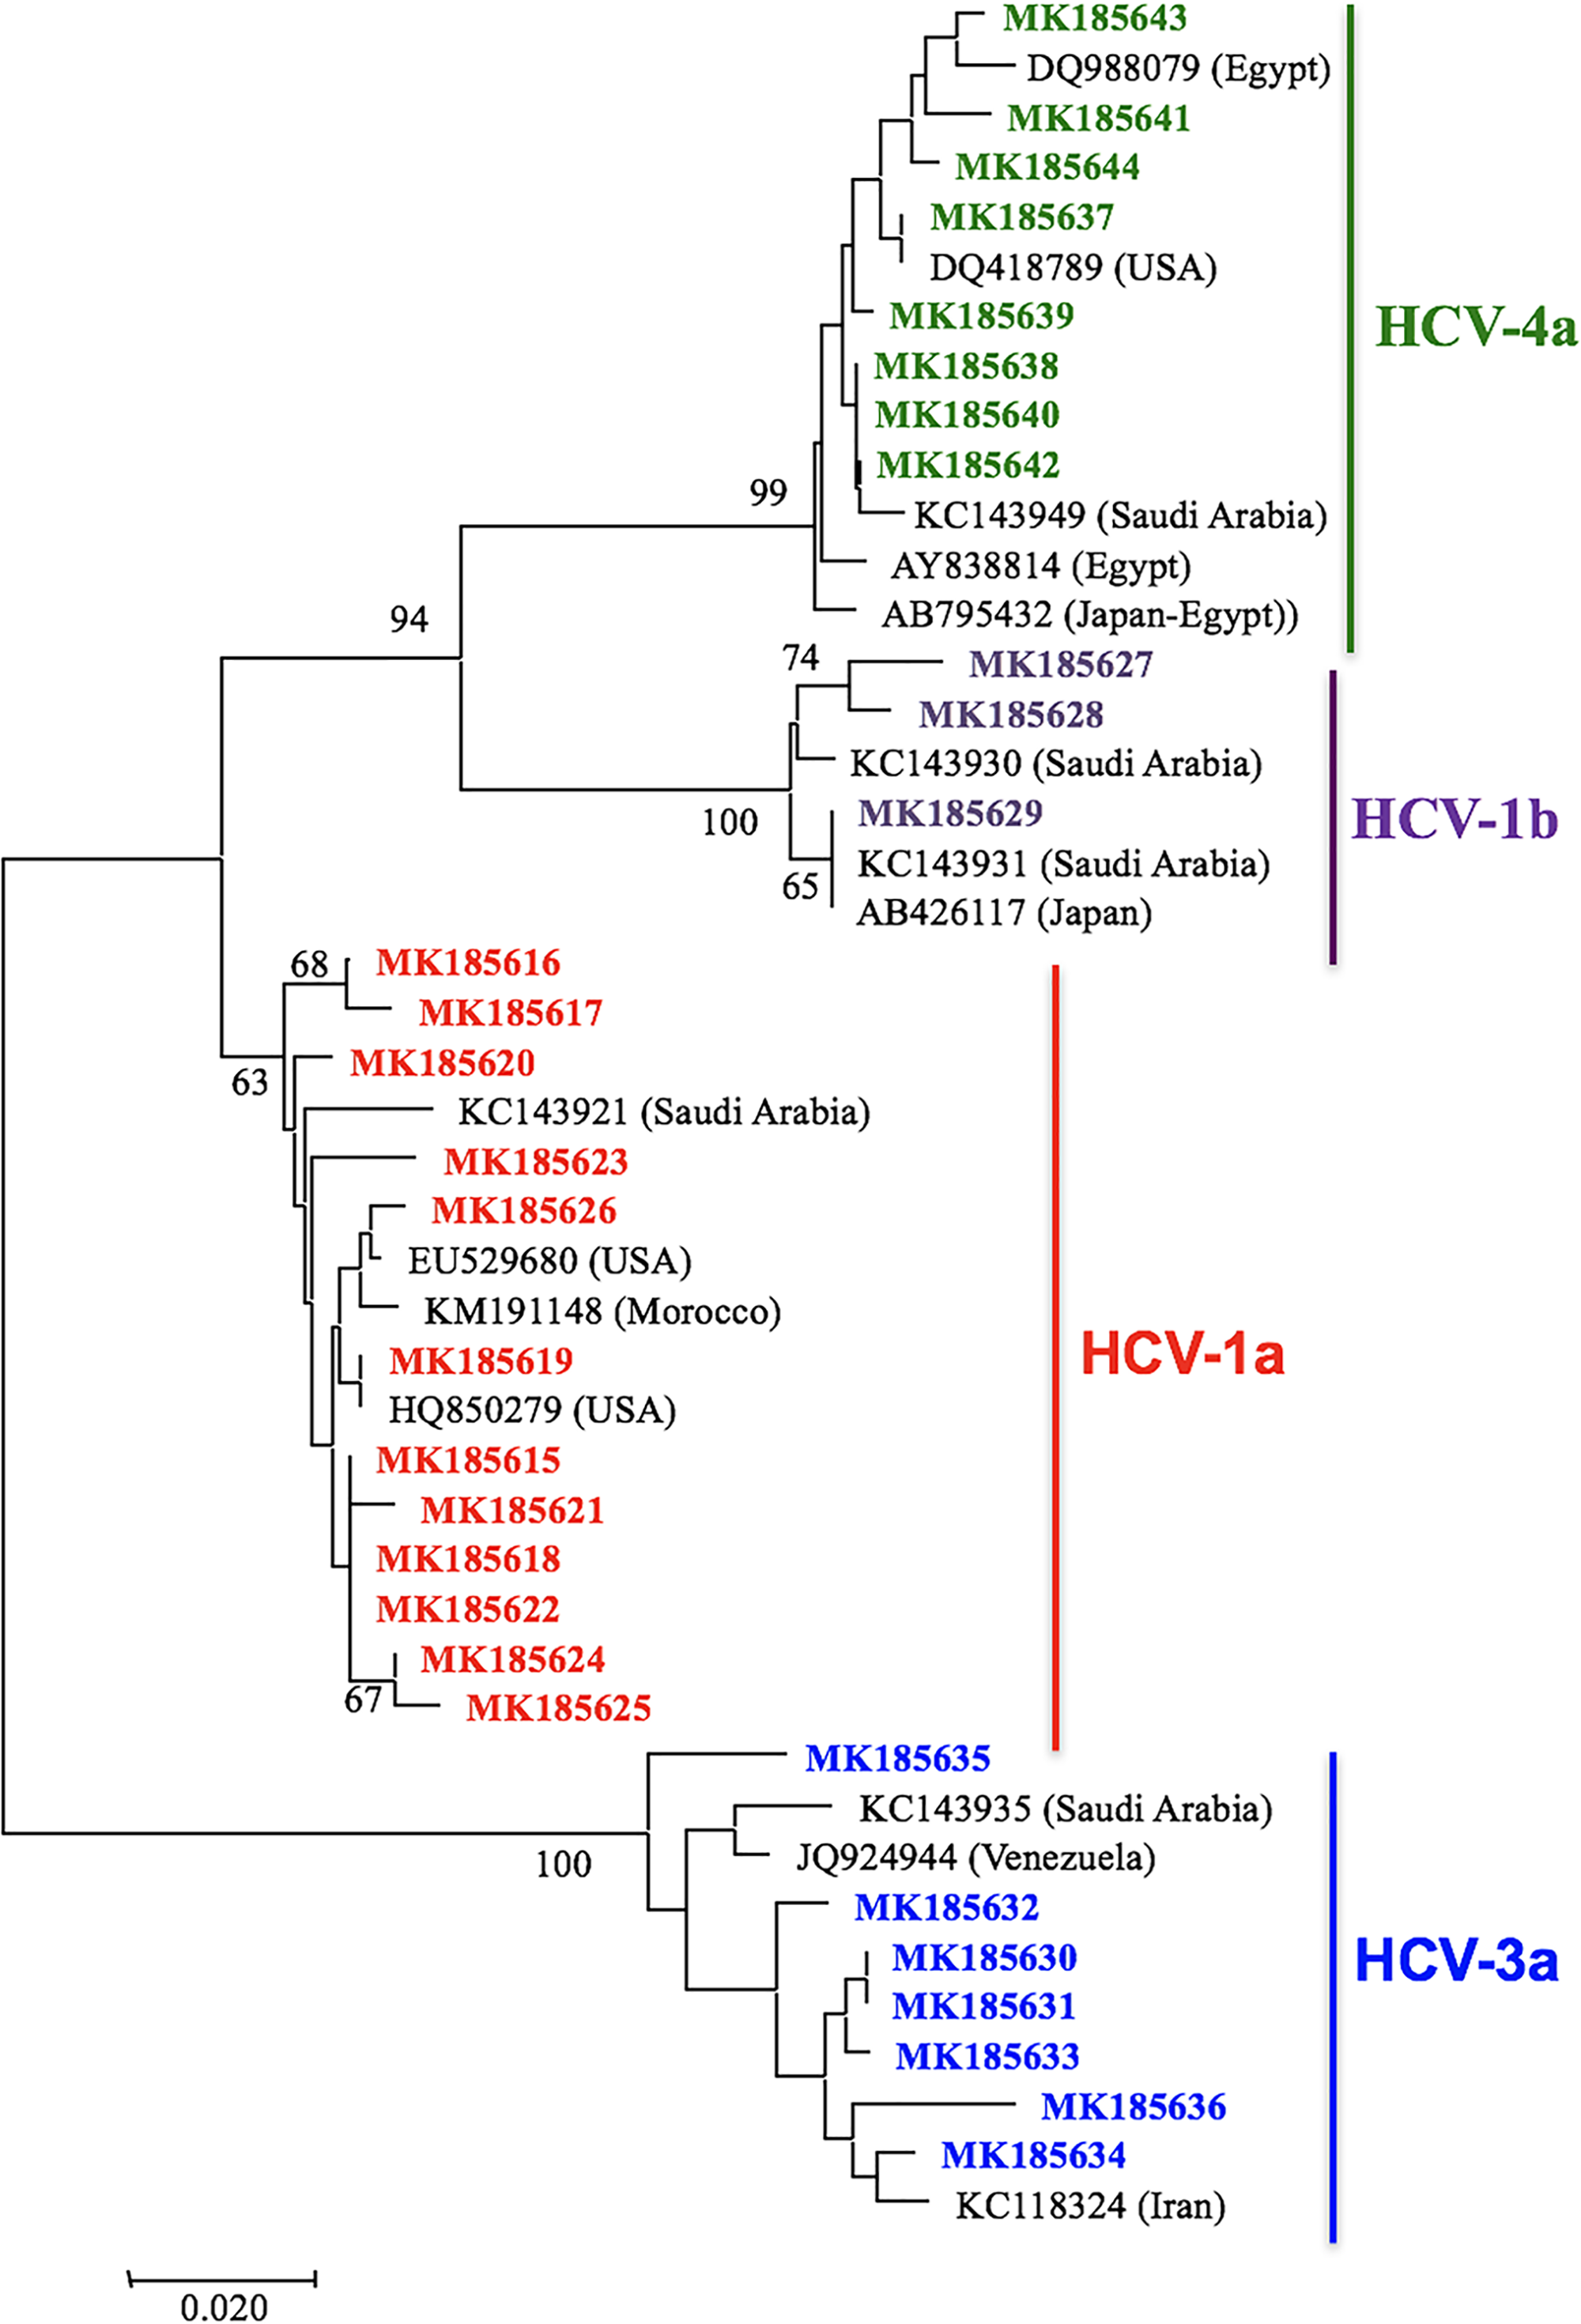 Neighbor-Joining phylogenetic analysis of Palestinian HCV 1a, 1b, 4a, and 3a isolates